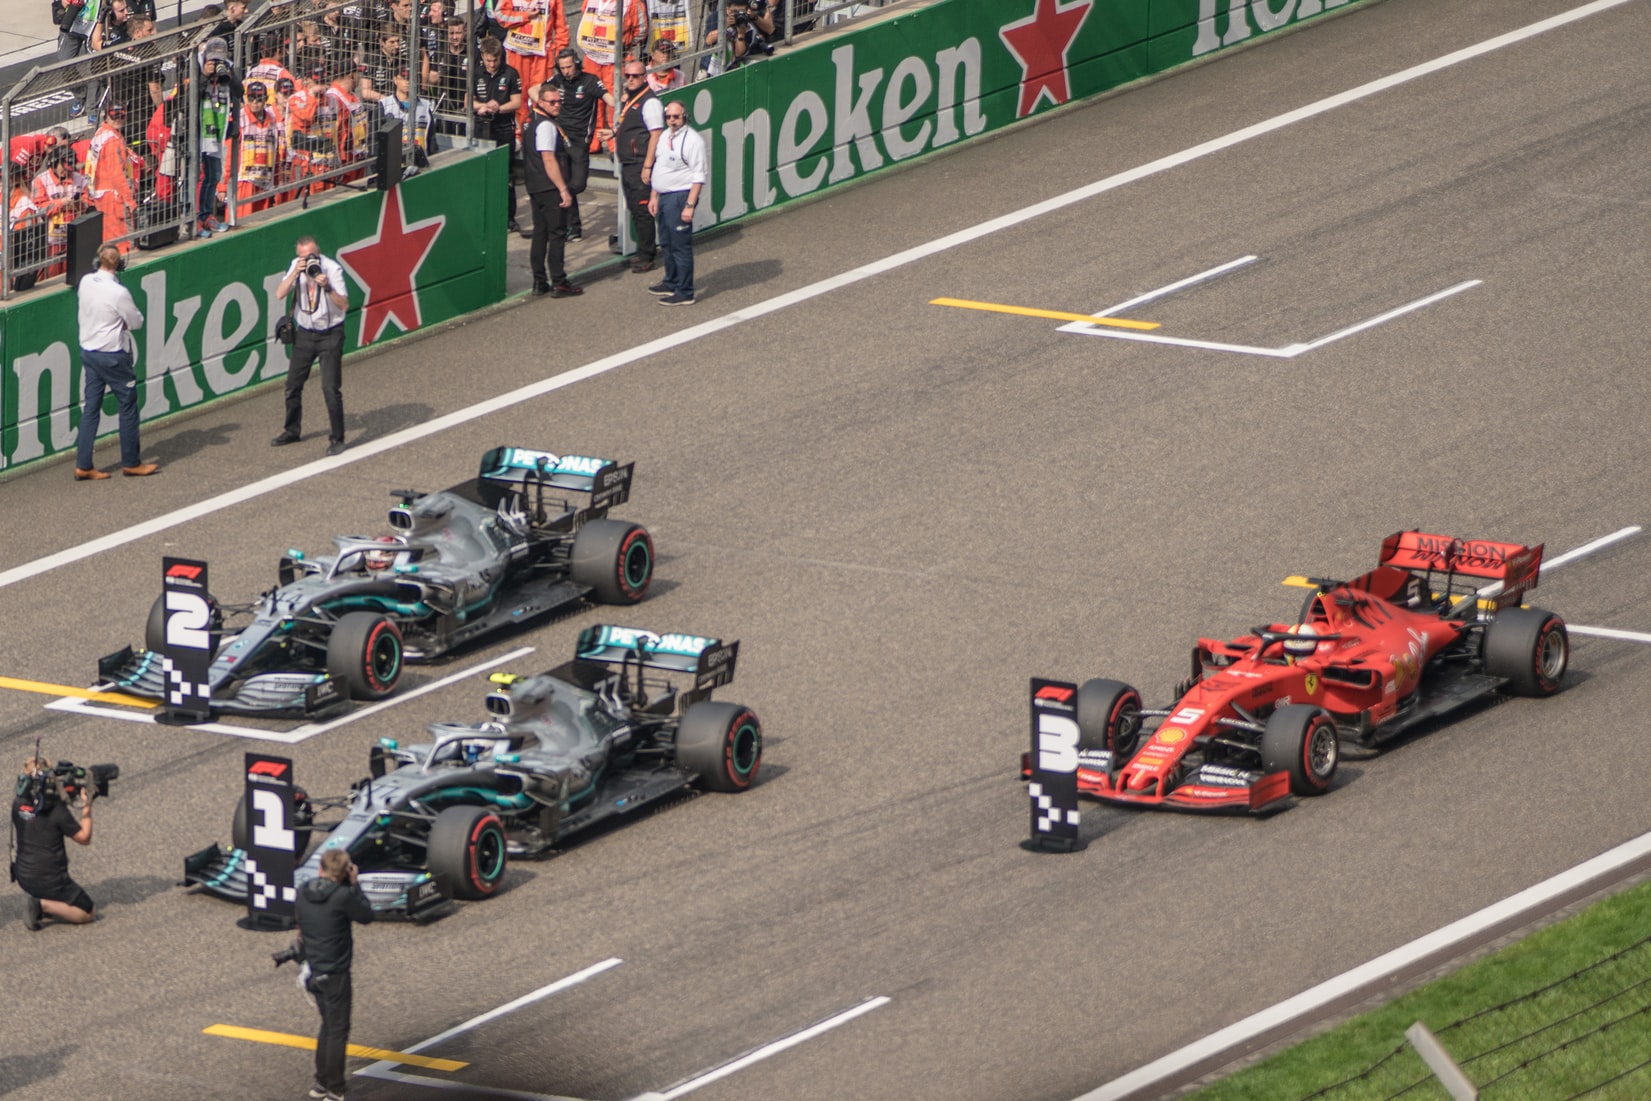 How could Formula 1 inspire horse racing events in future?